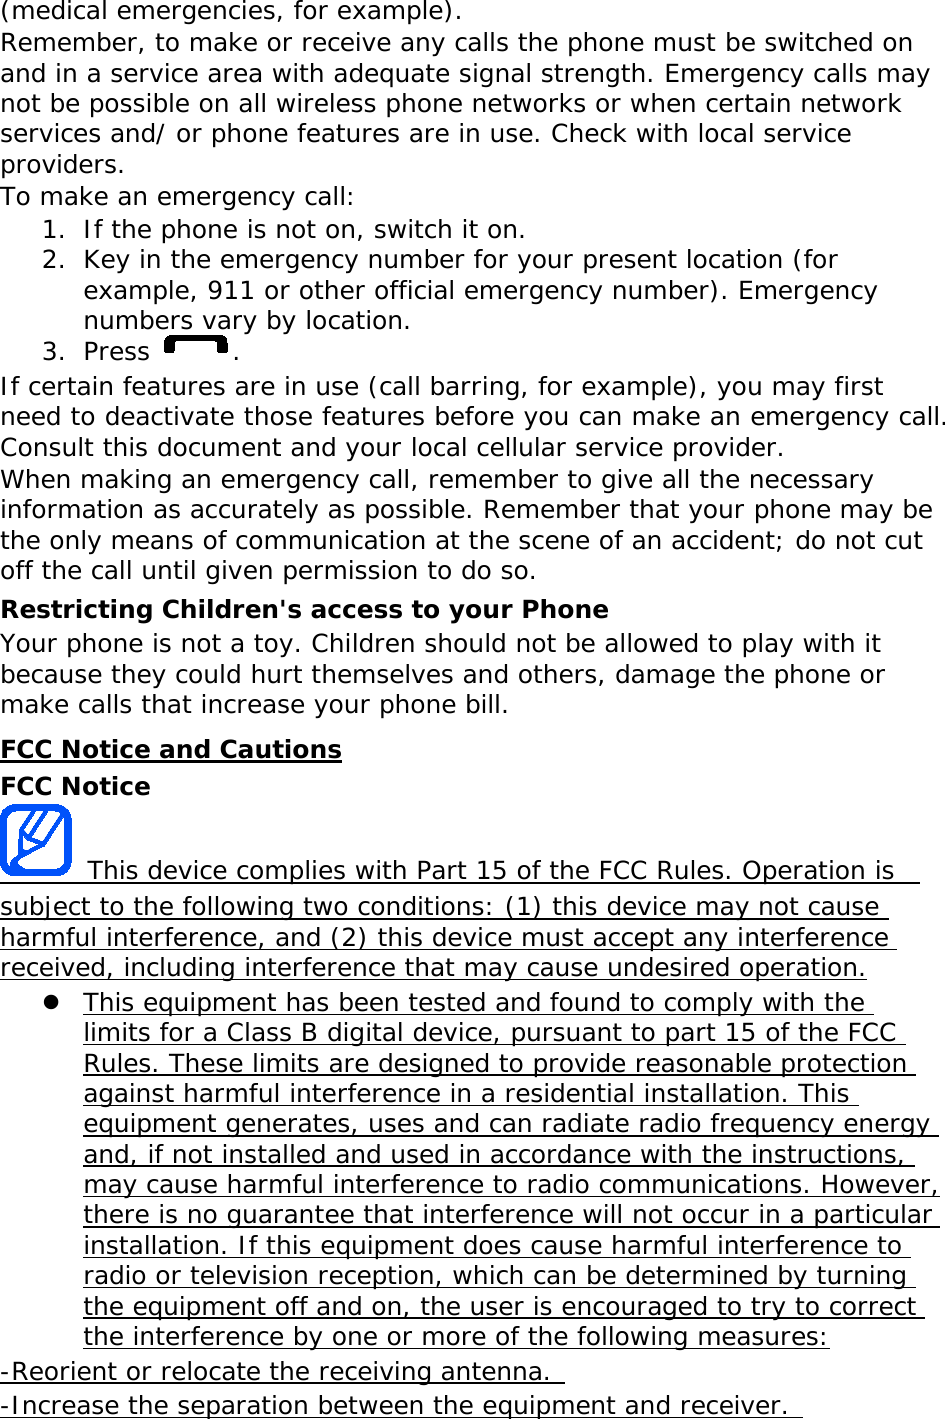 (medical emergencies, for example). Remember, to make or receive any calls the phone must be switched on and in a service area with adequate signal strength. Emergency calls may not be possible on all wireless phone networks or when certain network services and/ or phone features are in use. Check with local service providers. To make an emergency call: 1. If the phone is not on, switch it on. 2. Key in the emergency number for your present location (for example, 911 or other official emergency number). Emergency numbers vary by location. 3. Press  . If certain features are in use (call barring, for example), you may first need to deactivate those features before you can make an emergency call. Consult this document and your local cellular service provider. When making an emergency call, remember to give all the necessary information as accurately as possible. Remember that your phone may be the only means of communication at the scene of an accident; do not cut off the call until given permission to do so. Restricting Children&apos;s access to your Phone Your phone is not a toy. Children should not be allowed to play with it because they could hurt themselves and others, damage the phone or make calls that increase your phone bill. FCC Notice and Cautions FCC Notice  This device complies with Part 15 of the FCC Rules. Operation is  subject to the following two conditions: (1) this device may not cause harmful interference, and (2) this device must accept any interference received, including interference that may cause undesired operation.  This equipment has been tested and found to comply with the limits for a Class B digital device, pursuant to part 15 of the FCC Rules. These limits are designed to provide reasonable protection against harmful interference in a residential installation. This equipment generates, uses and can radiate radio frequency energy and, if not installed and used in accordance with the instructions, may cause harmful interference to radio communications. However, there is no guarantee that interference will not occur in a particular installation. If this equipment does cause harmful interference to radio or television reception, which can be determined by turning the equipment off and on, the user is encouraged to try to correct the interference by one or more of the following measures: -Reorient or relocate the receiving antenna.  -Increase the separation between the equipment and receiver.  